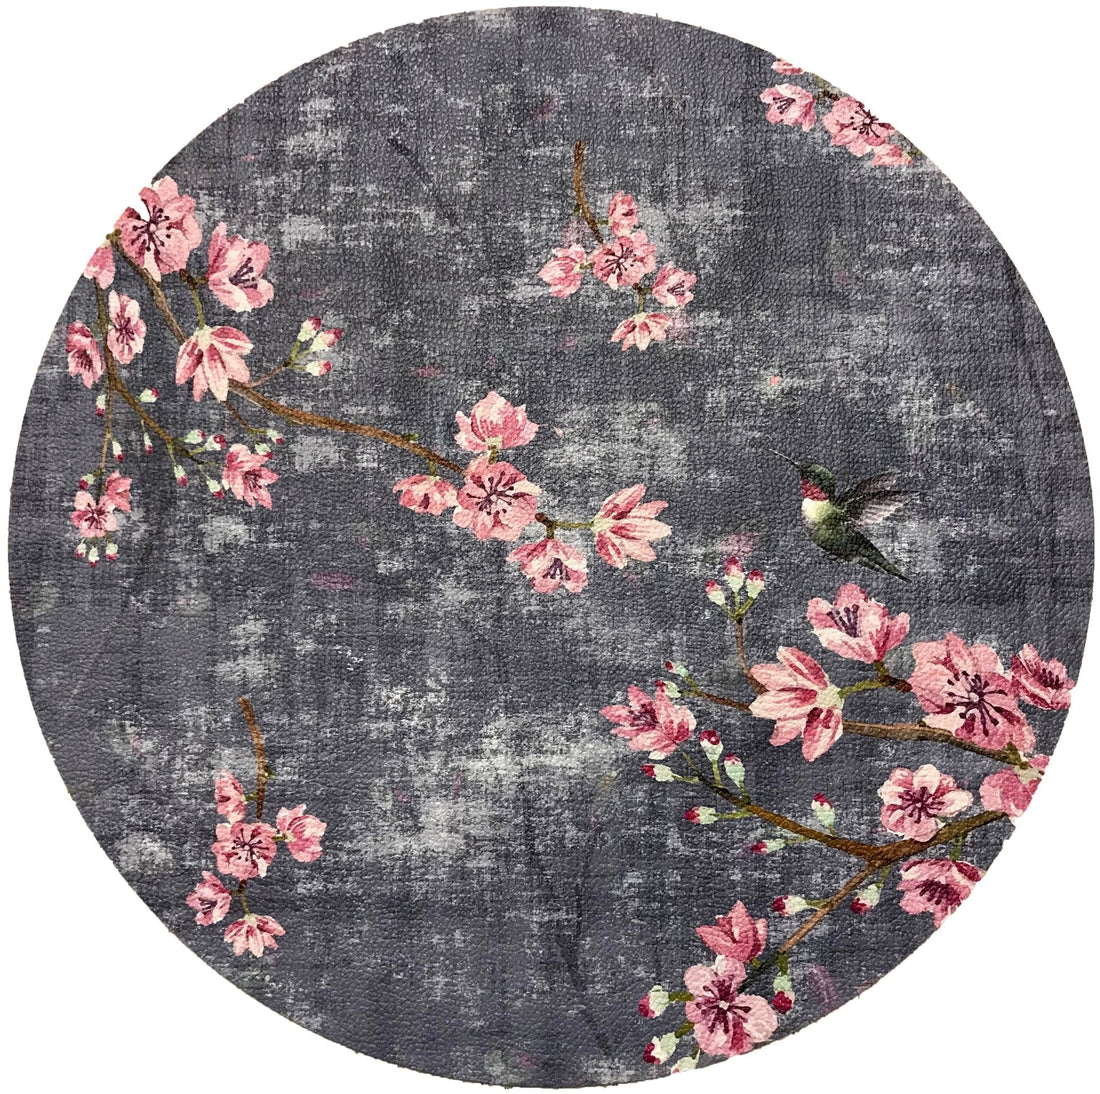 Blossom Fantasia Charcoal 16 Round Pebble Placemats, Set Of 4 - nicolettemayer.com